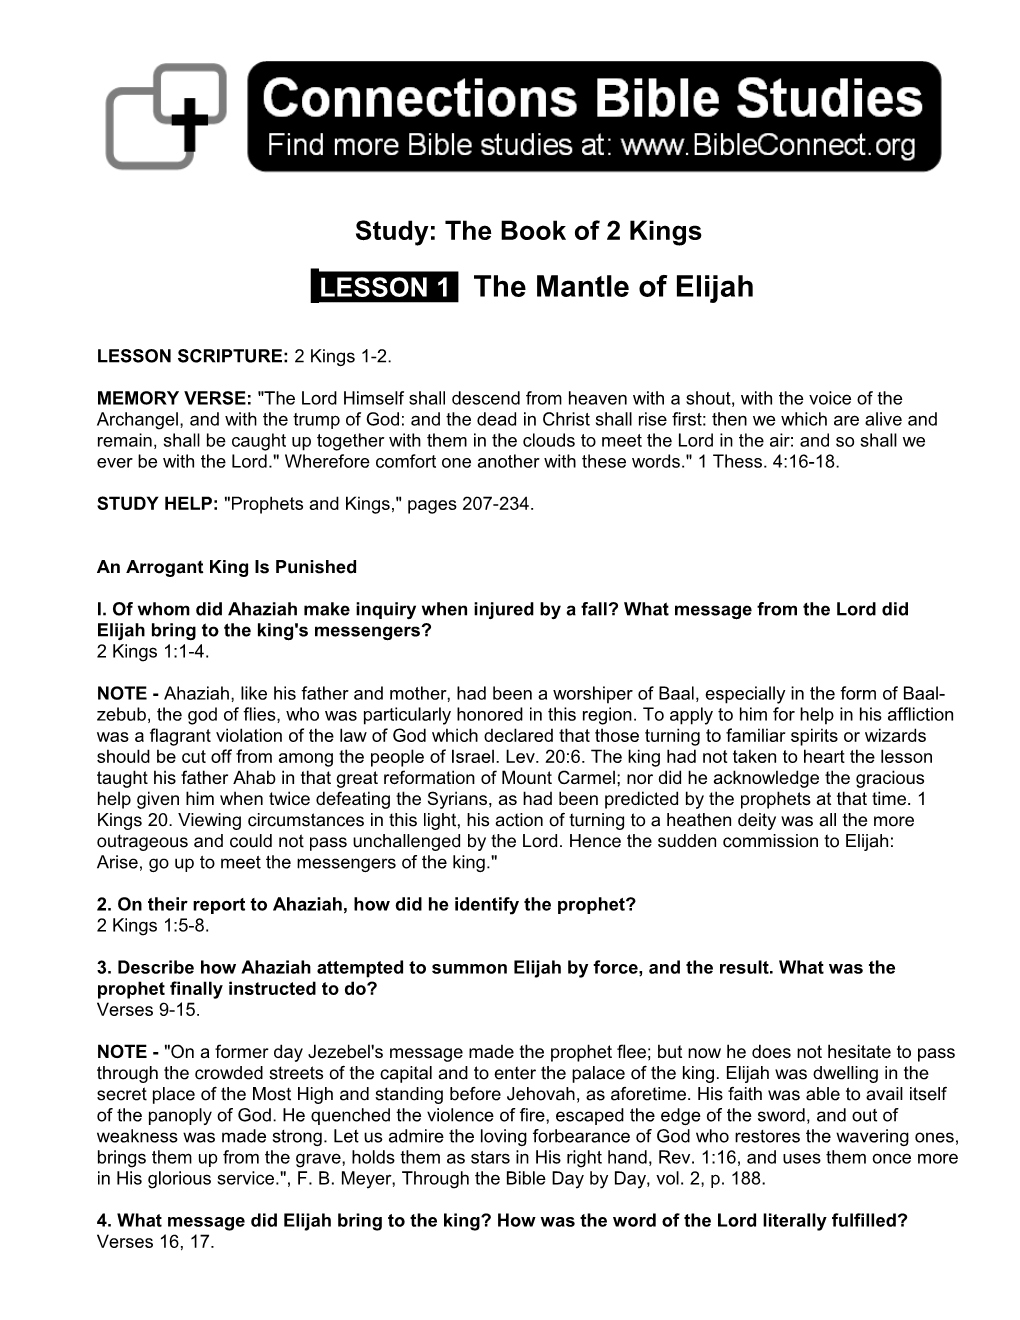 THIS WEEK's STUDY: Overview of the Book of Genesis